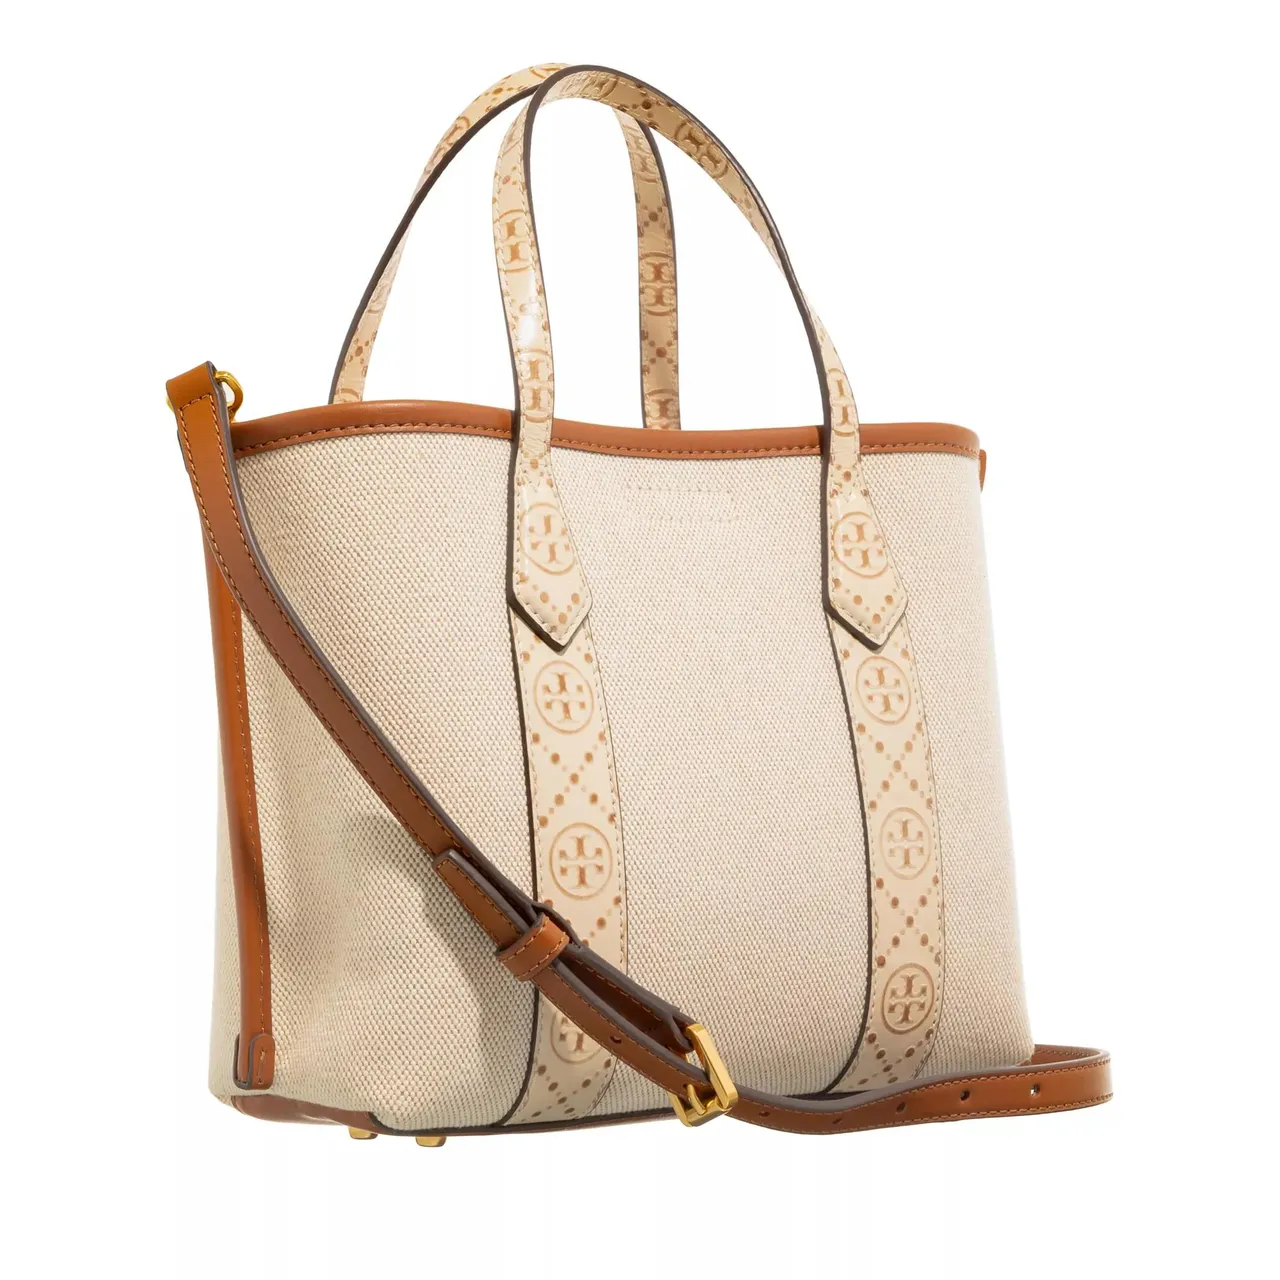 Tory Burch Tote Bags - Perry Canvas Small Triple-Compartment Tote - beige - Tote Bags for ladies